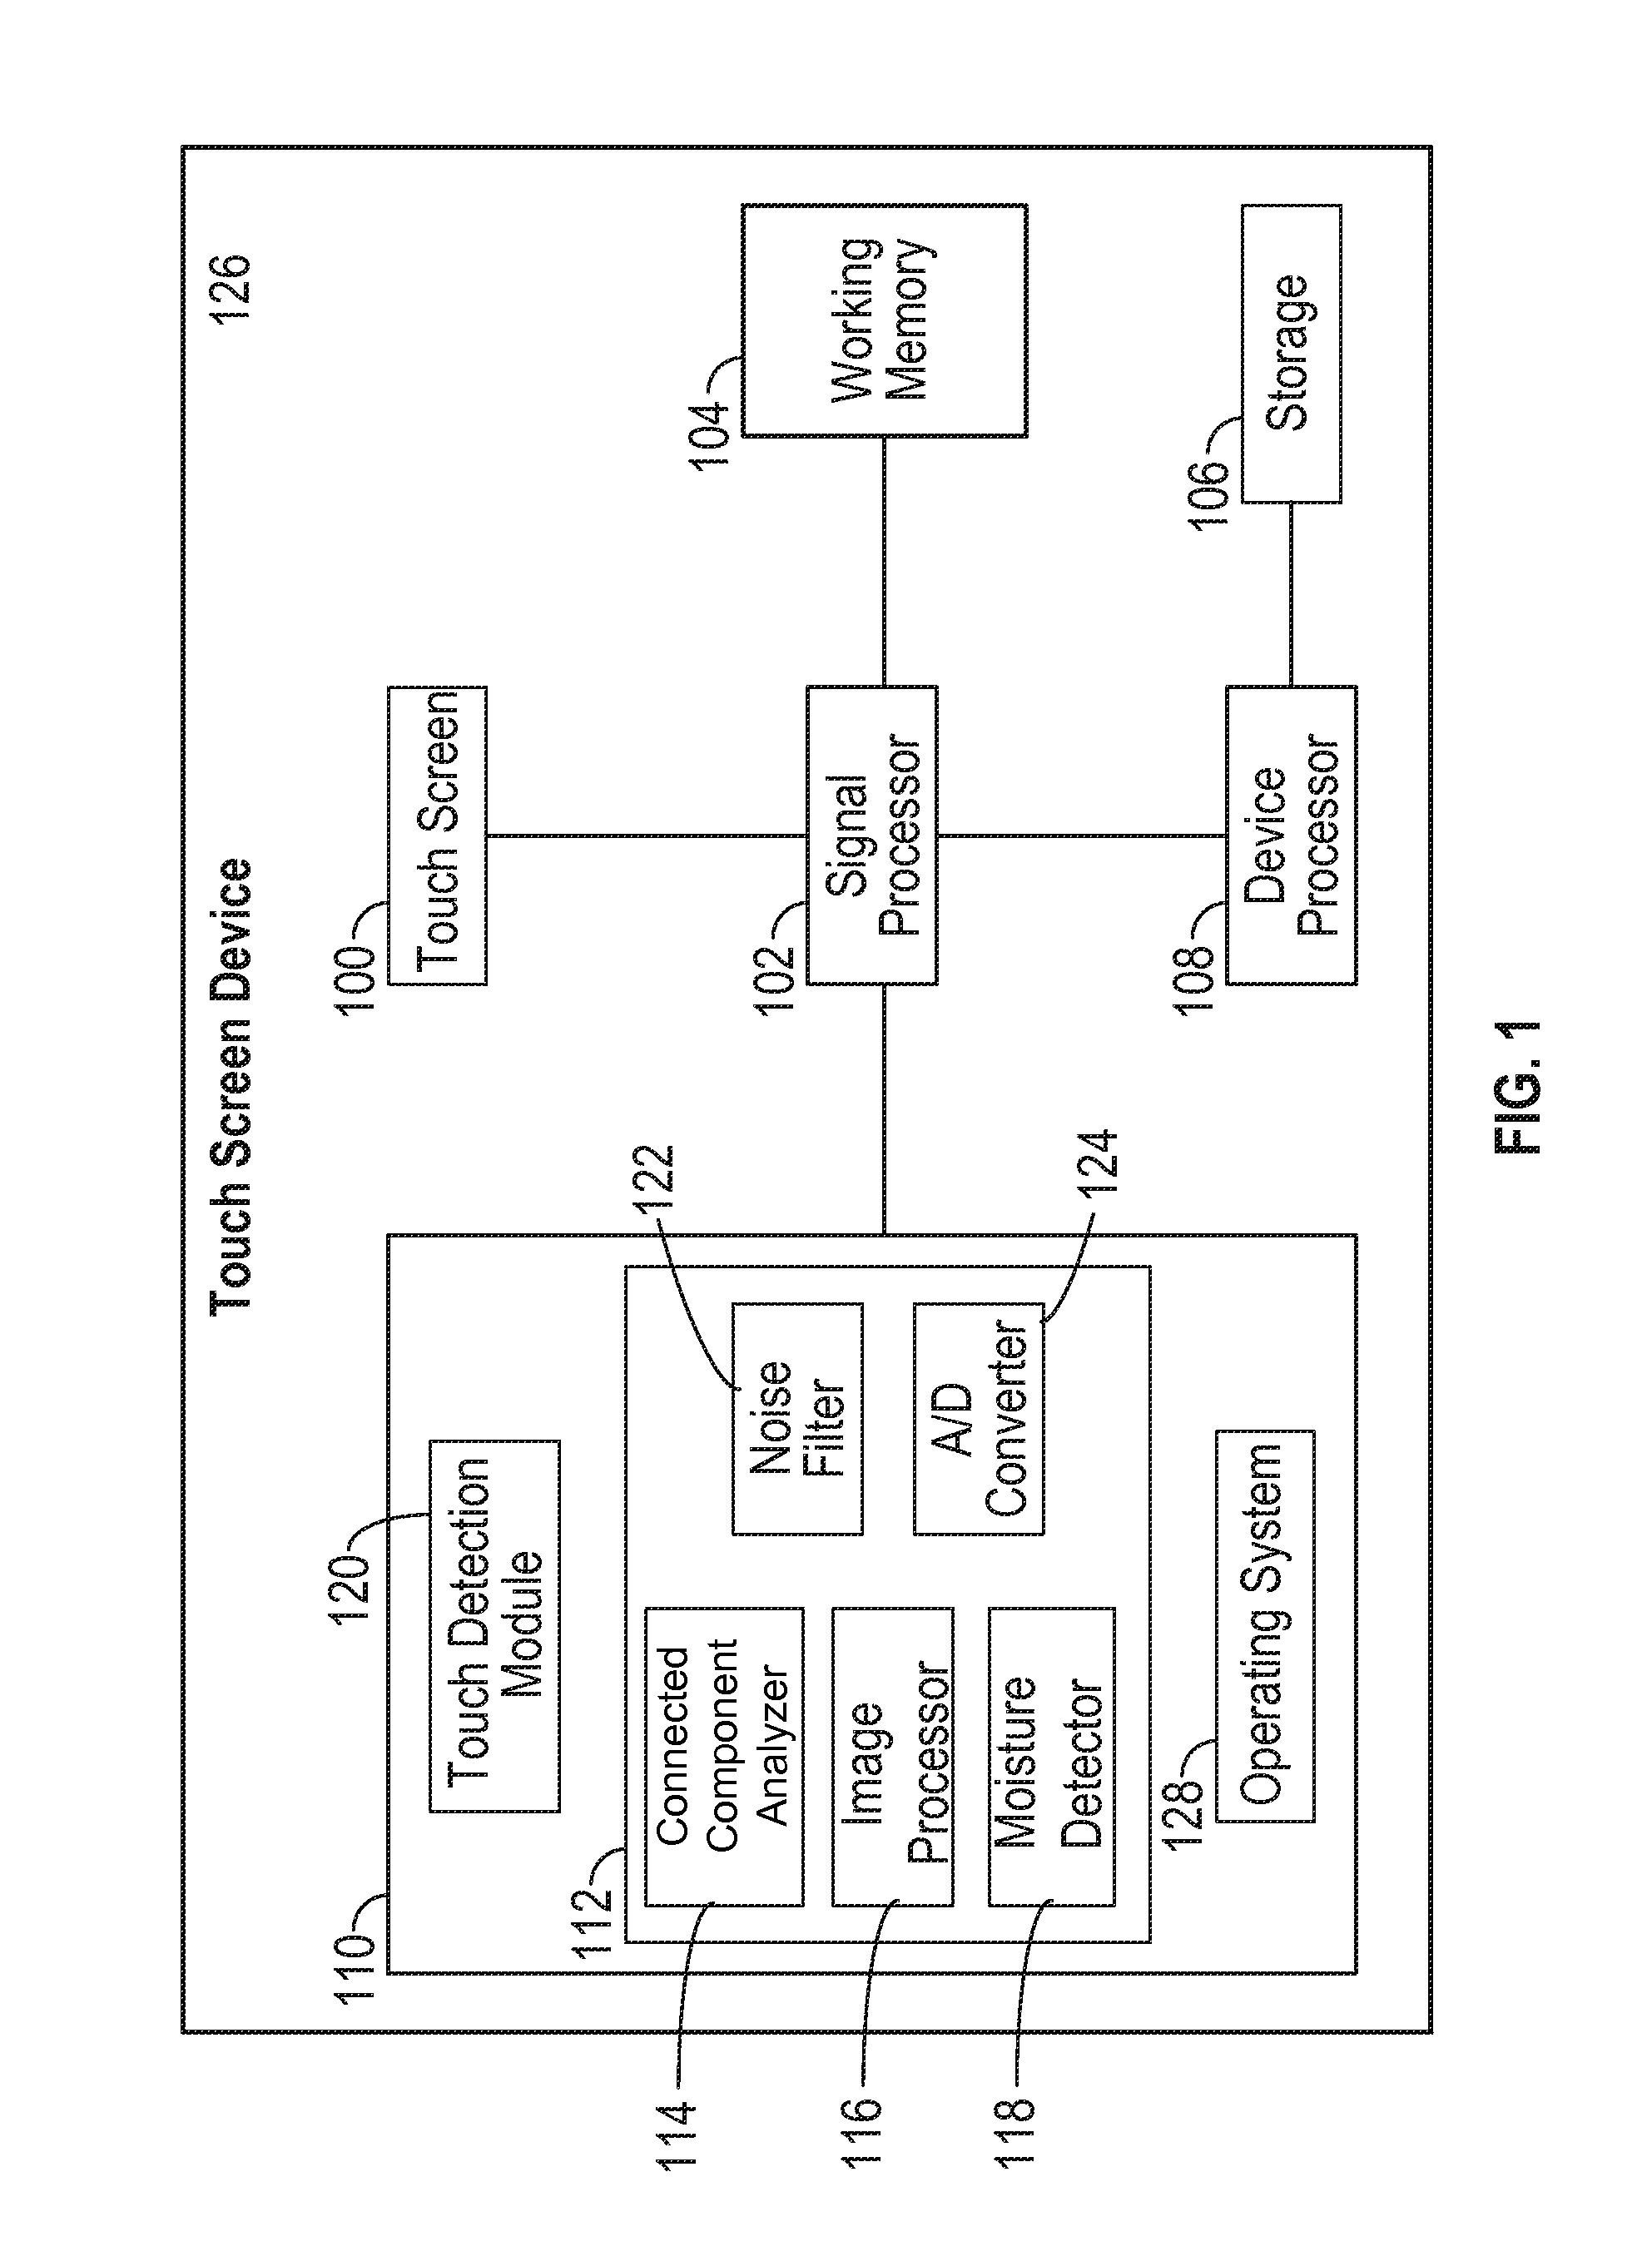 Systems and methods of moisture detection and false touch rejection on touch screen devices